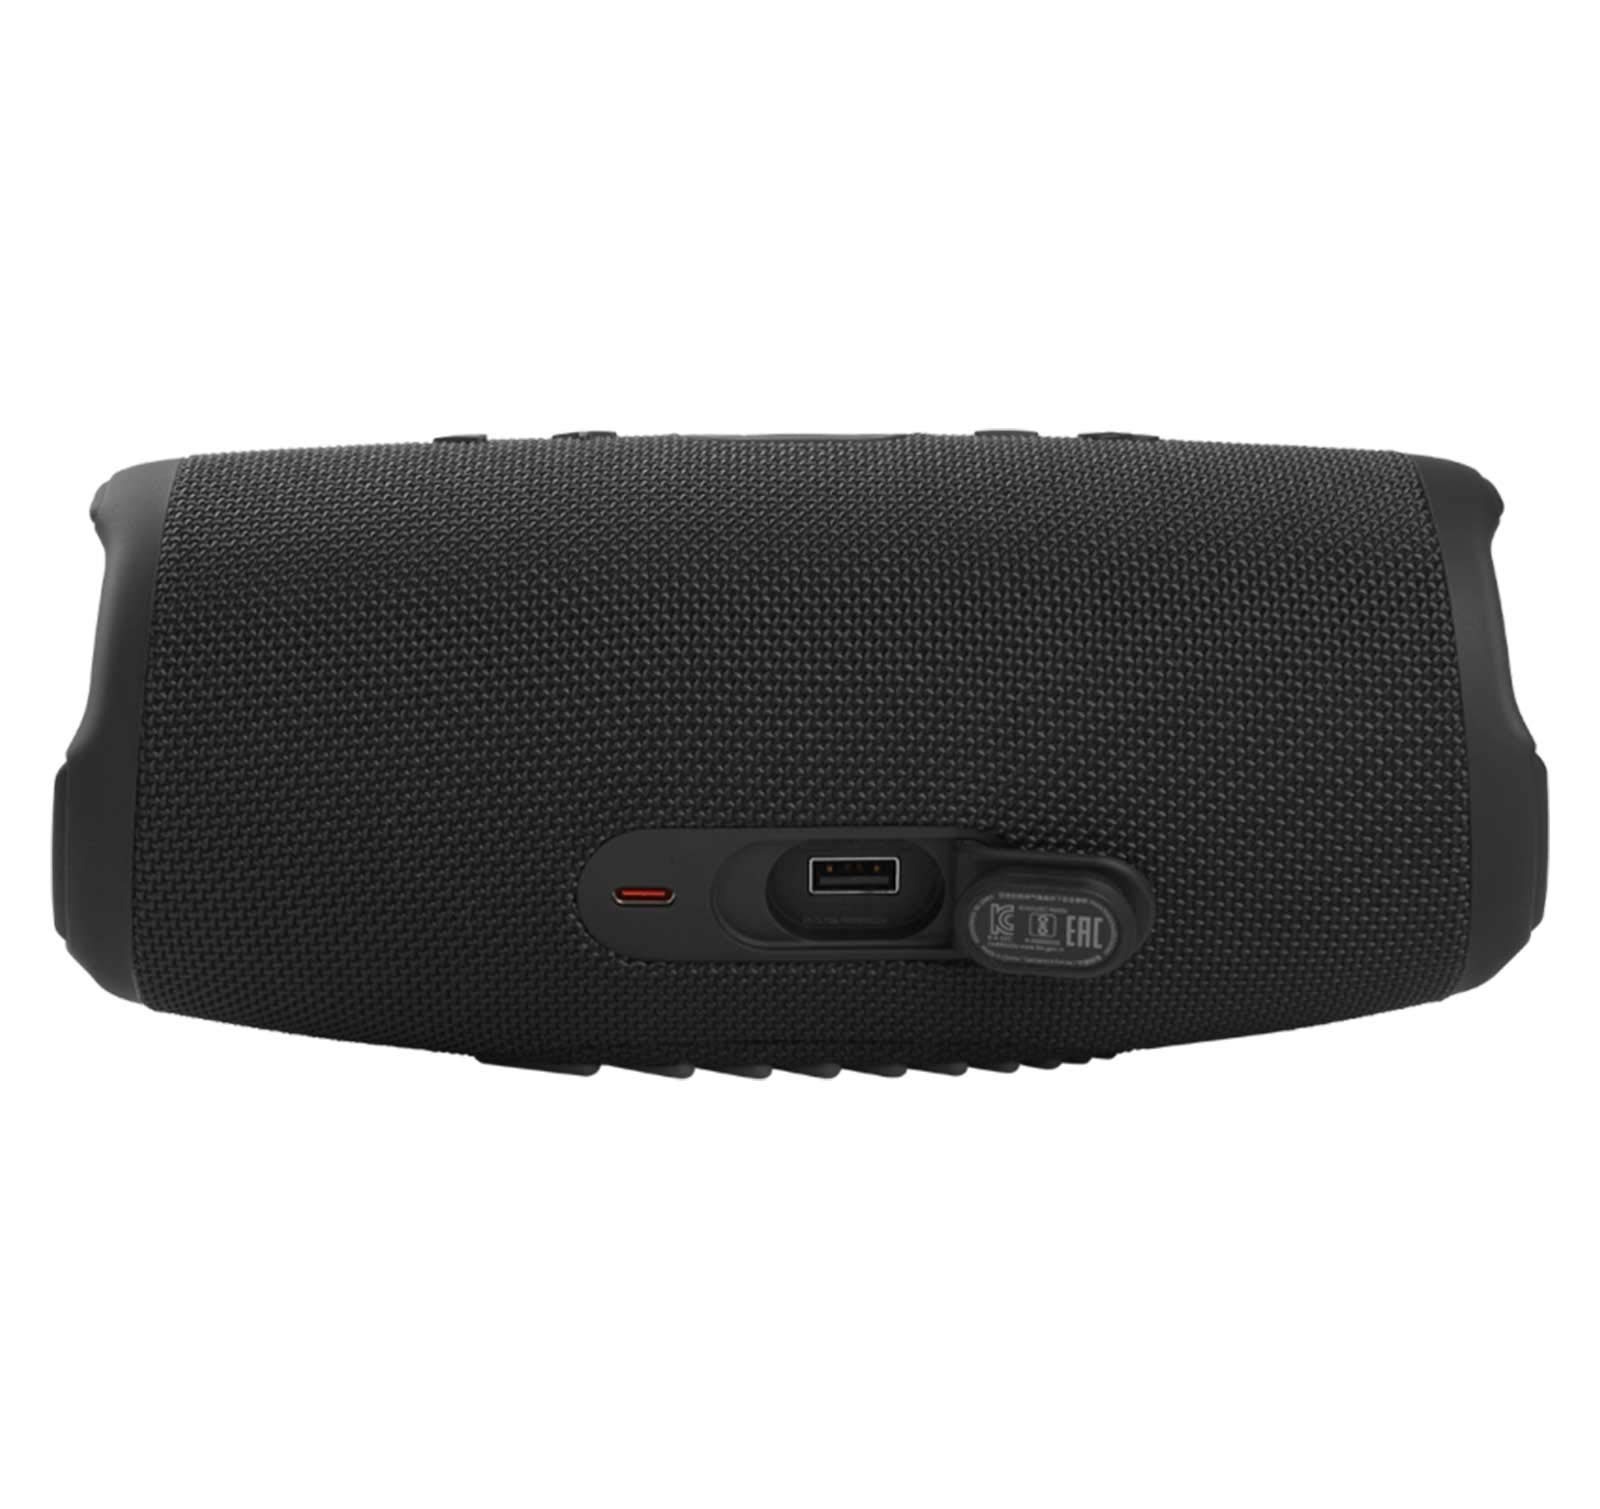 JBL Charge 5 Portable Wireless Bluetooth Speaker with IP67 Waterproof and USB Charge Out - Black (Renewed)